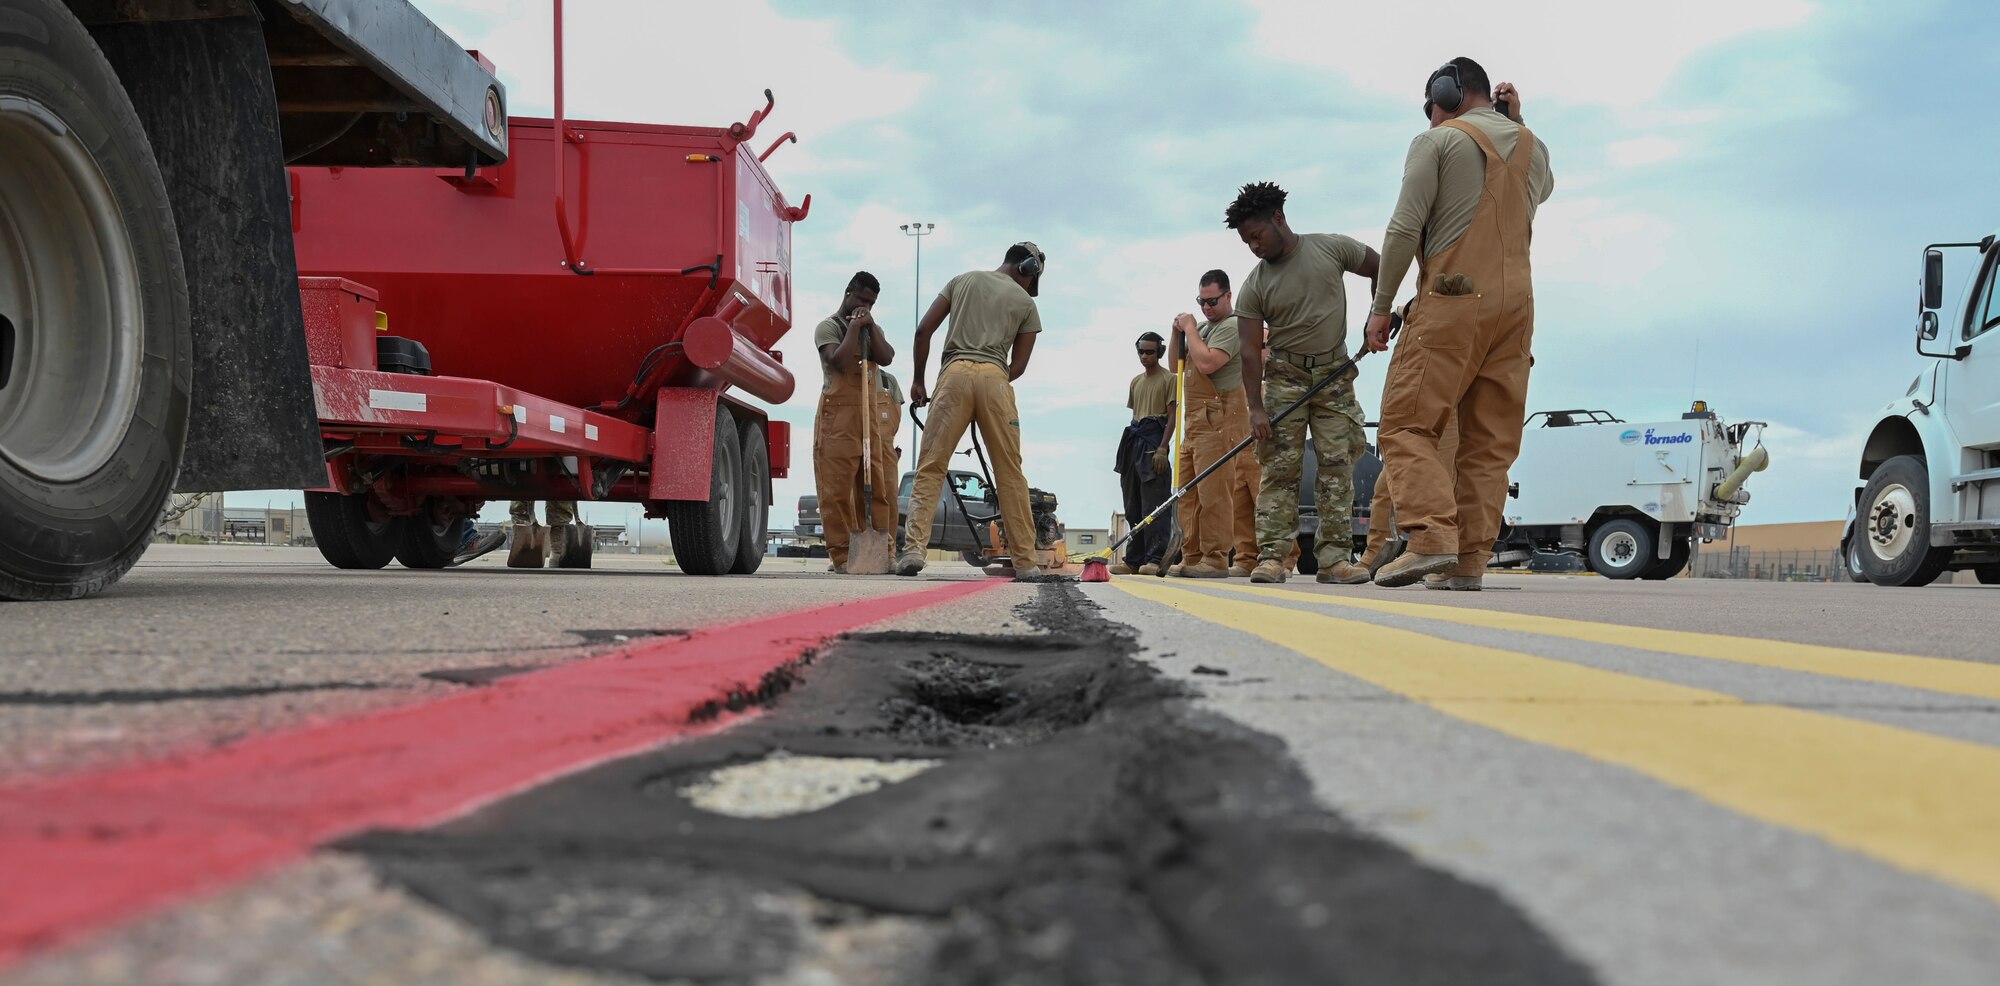 Airmen from the 49th Civil Engineer Squadron perform airway pavement repair at Holloman Air Force Base, New Mexico, June 30, 2023. The 49th CES pavement and construction Airmen are often referred to as “Dirt Boyz” for their constant interaction with various heavy construction equipment and hand tools used to repair and maintain Holloman’s roads, airfields, fences and drainage systems. (U.S. Air Force photo by Airman 1st Class Michelle Ferrari)